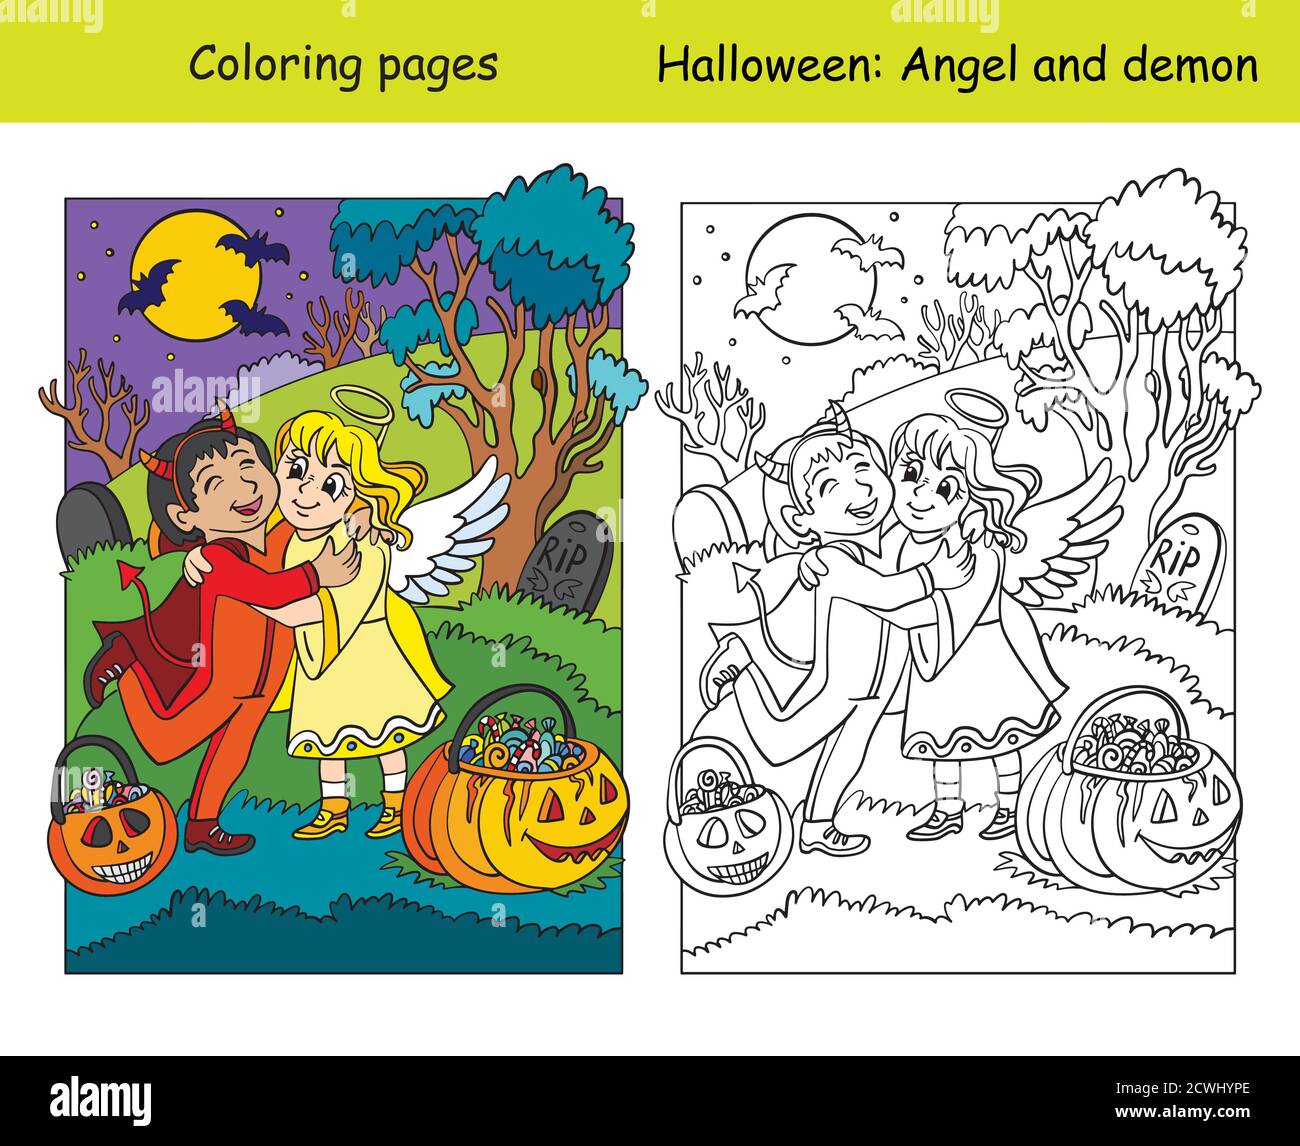 Coloring with colored example Halloween angel and demon Stock Vector ...